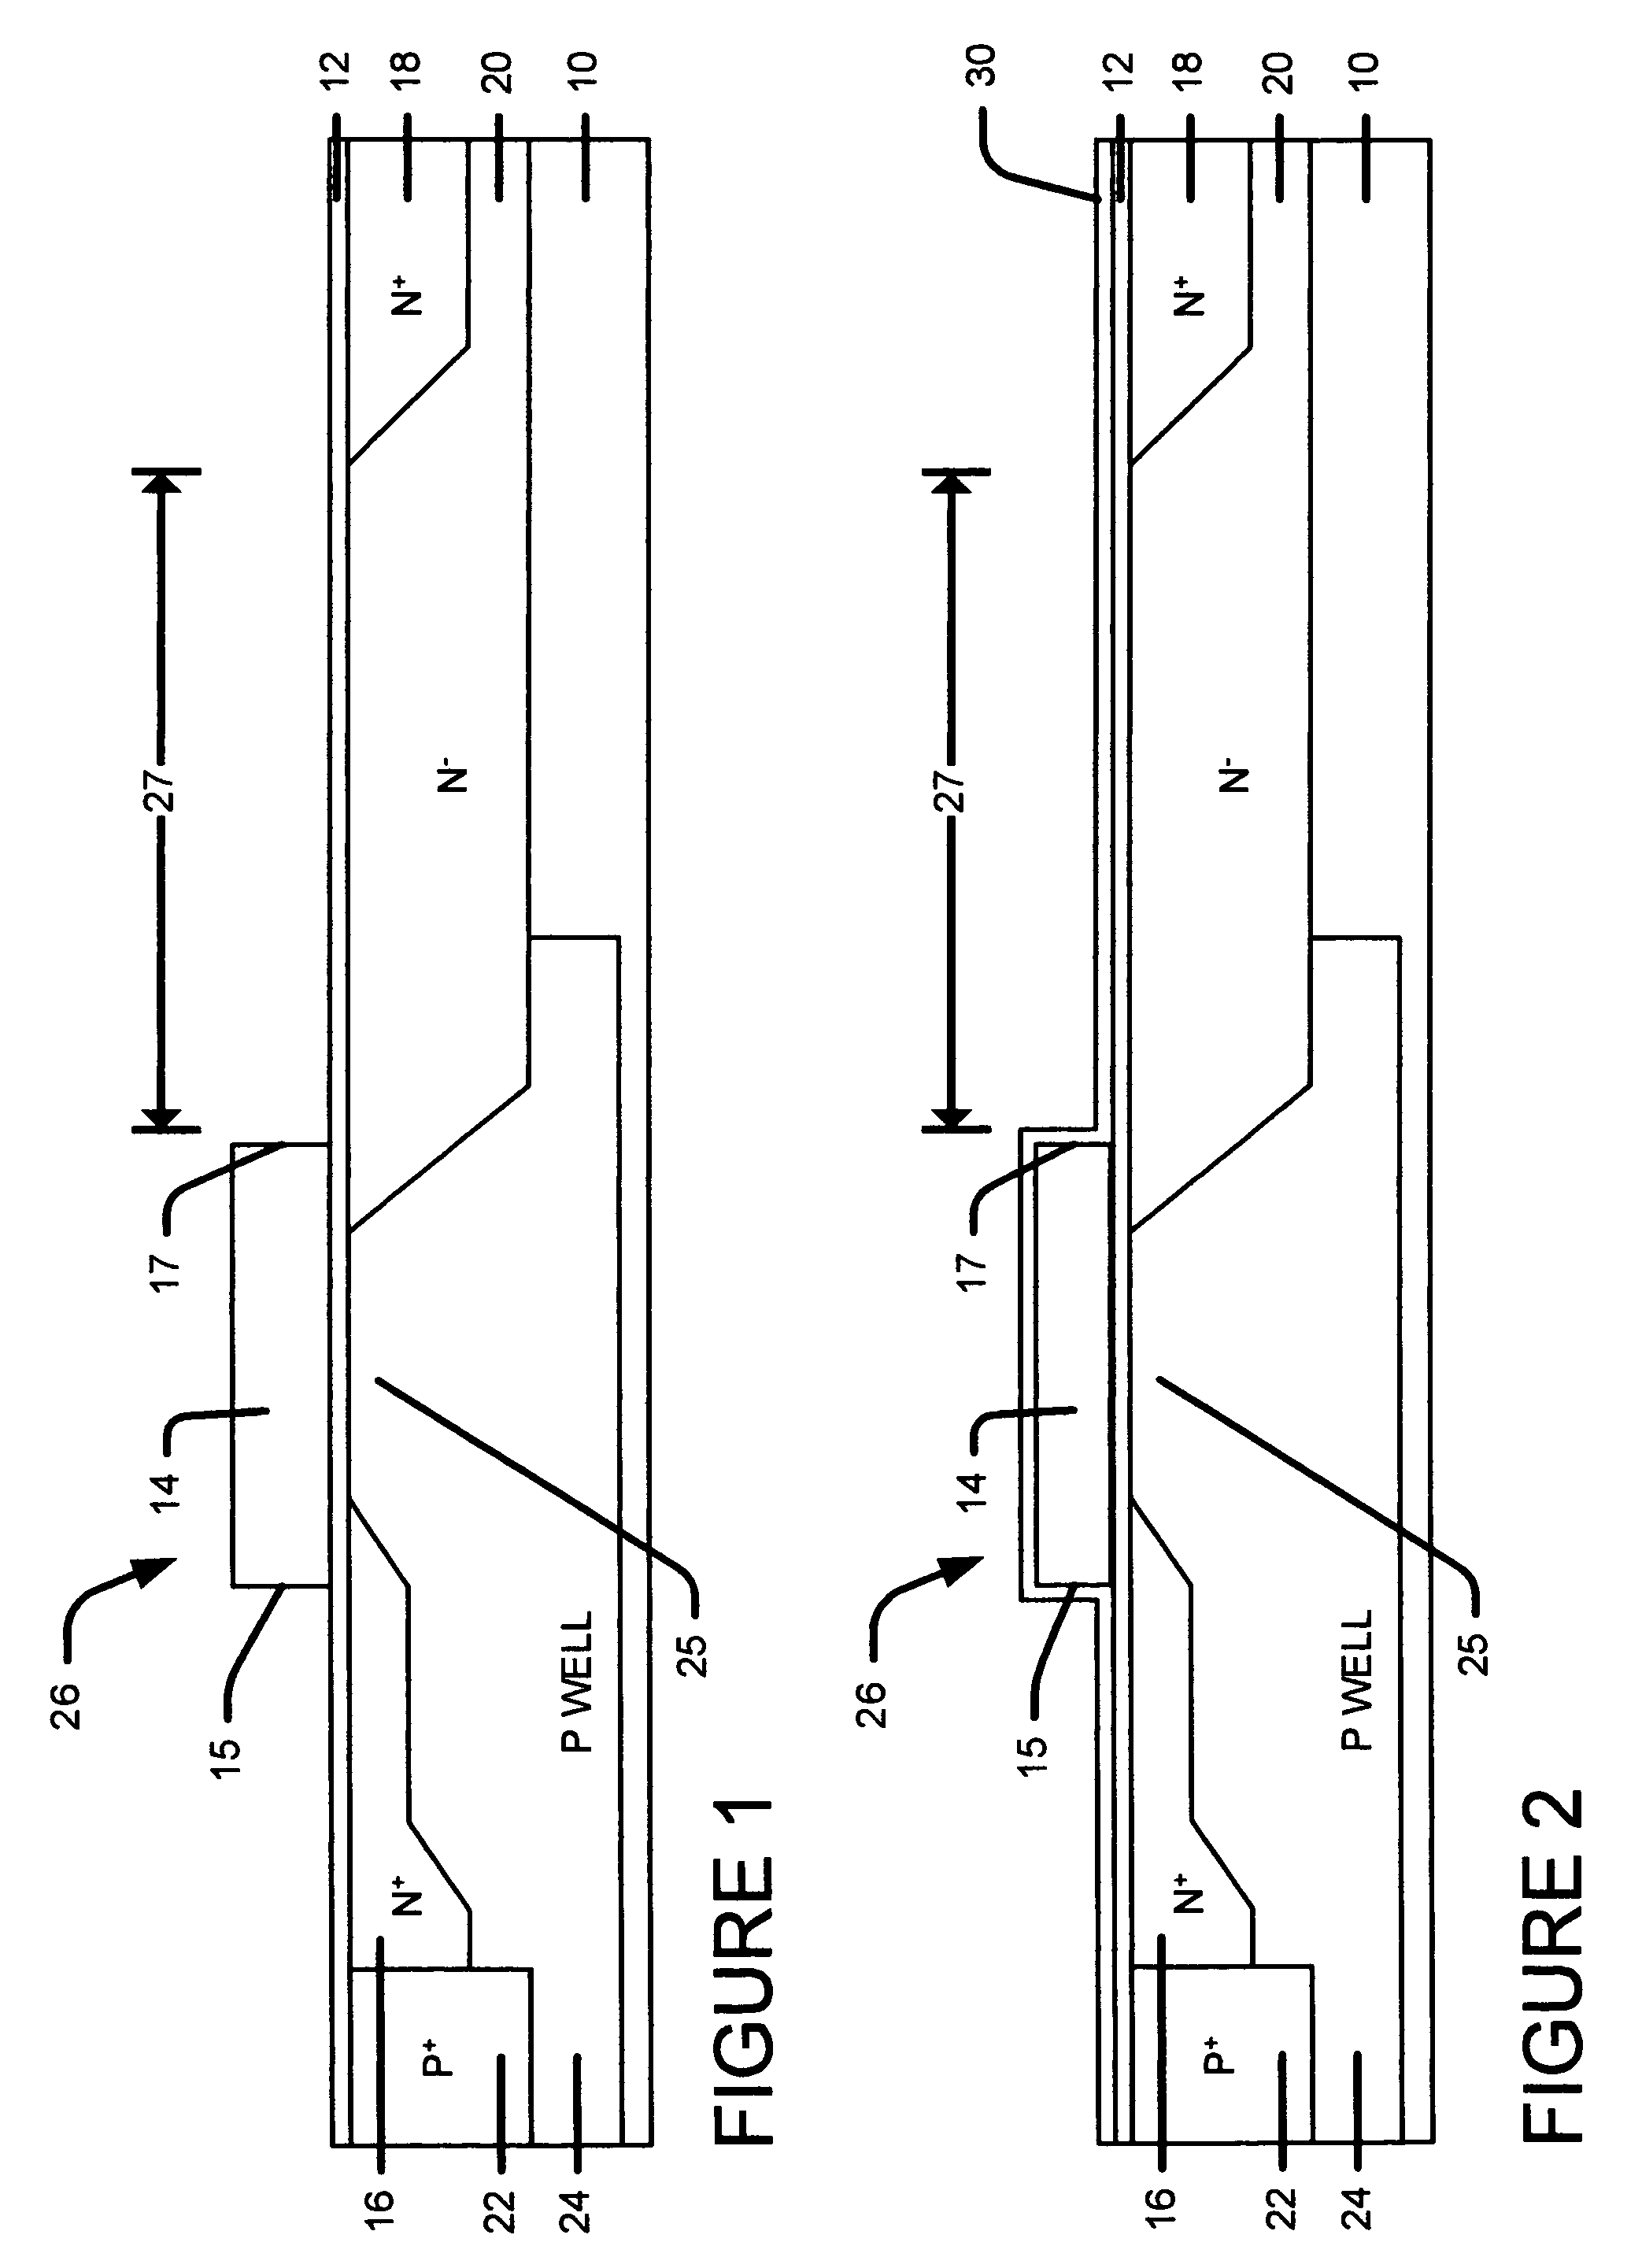 LDMOS using a combination of enhanced dielectric stress layer and dummy gates